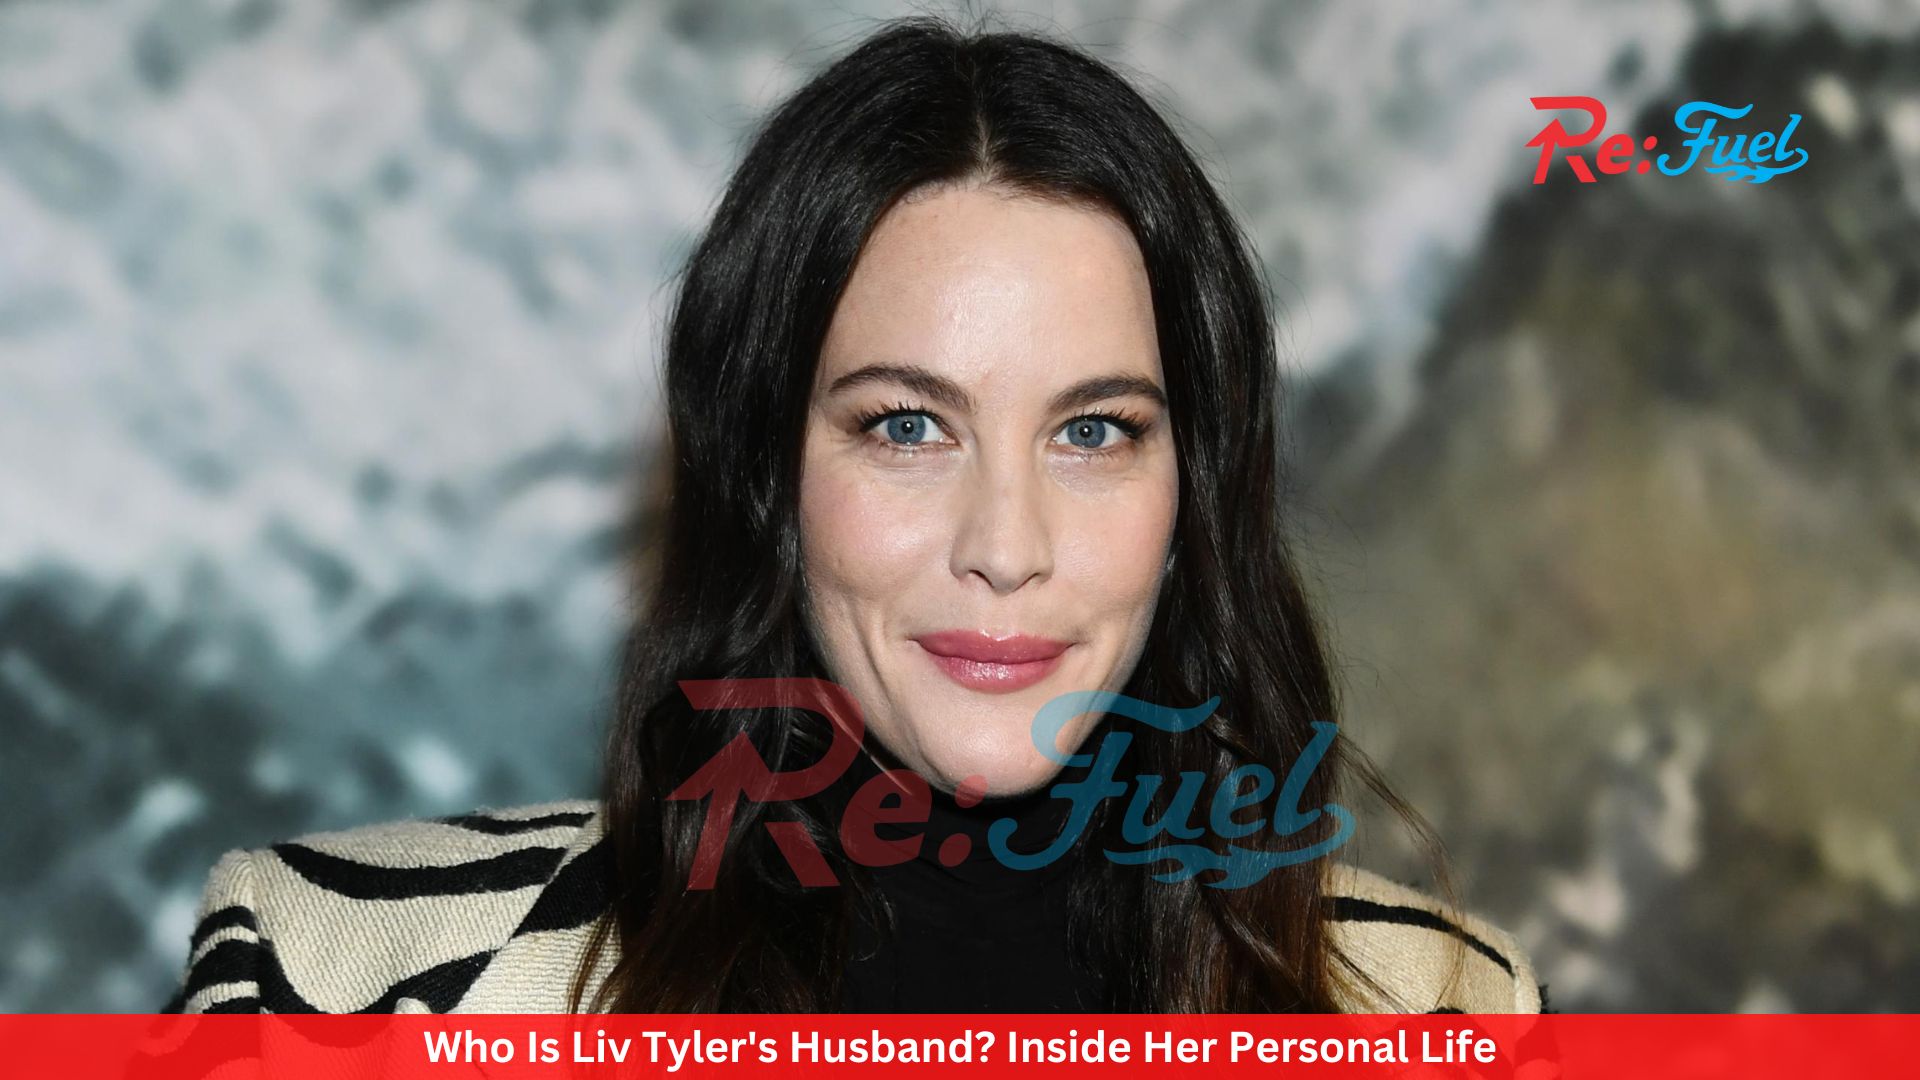 Who Is Liv Tyler's Husband? Inside Her Personal Life